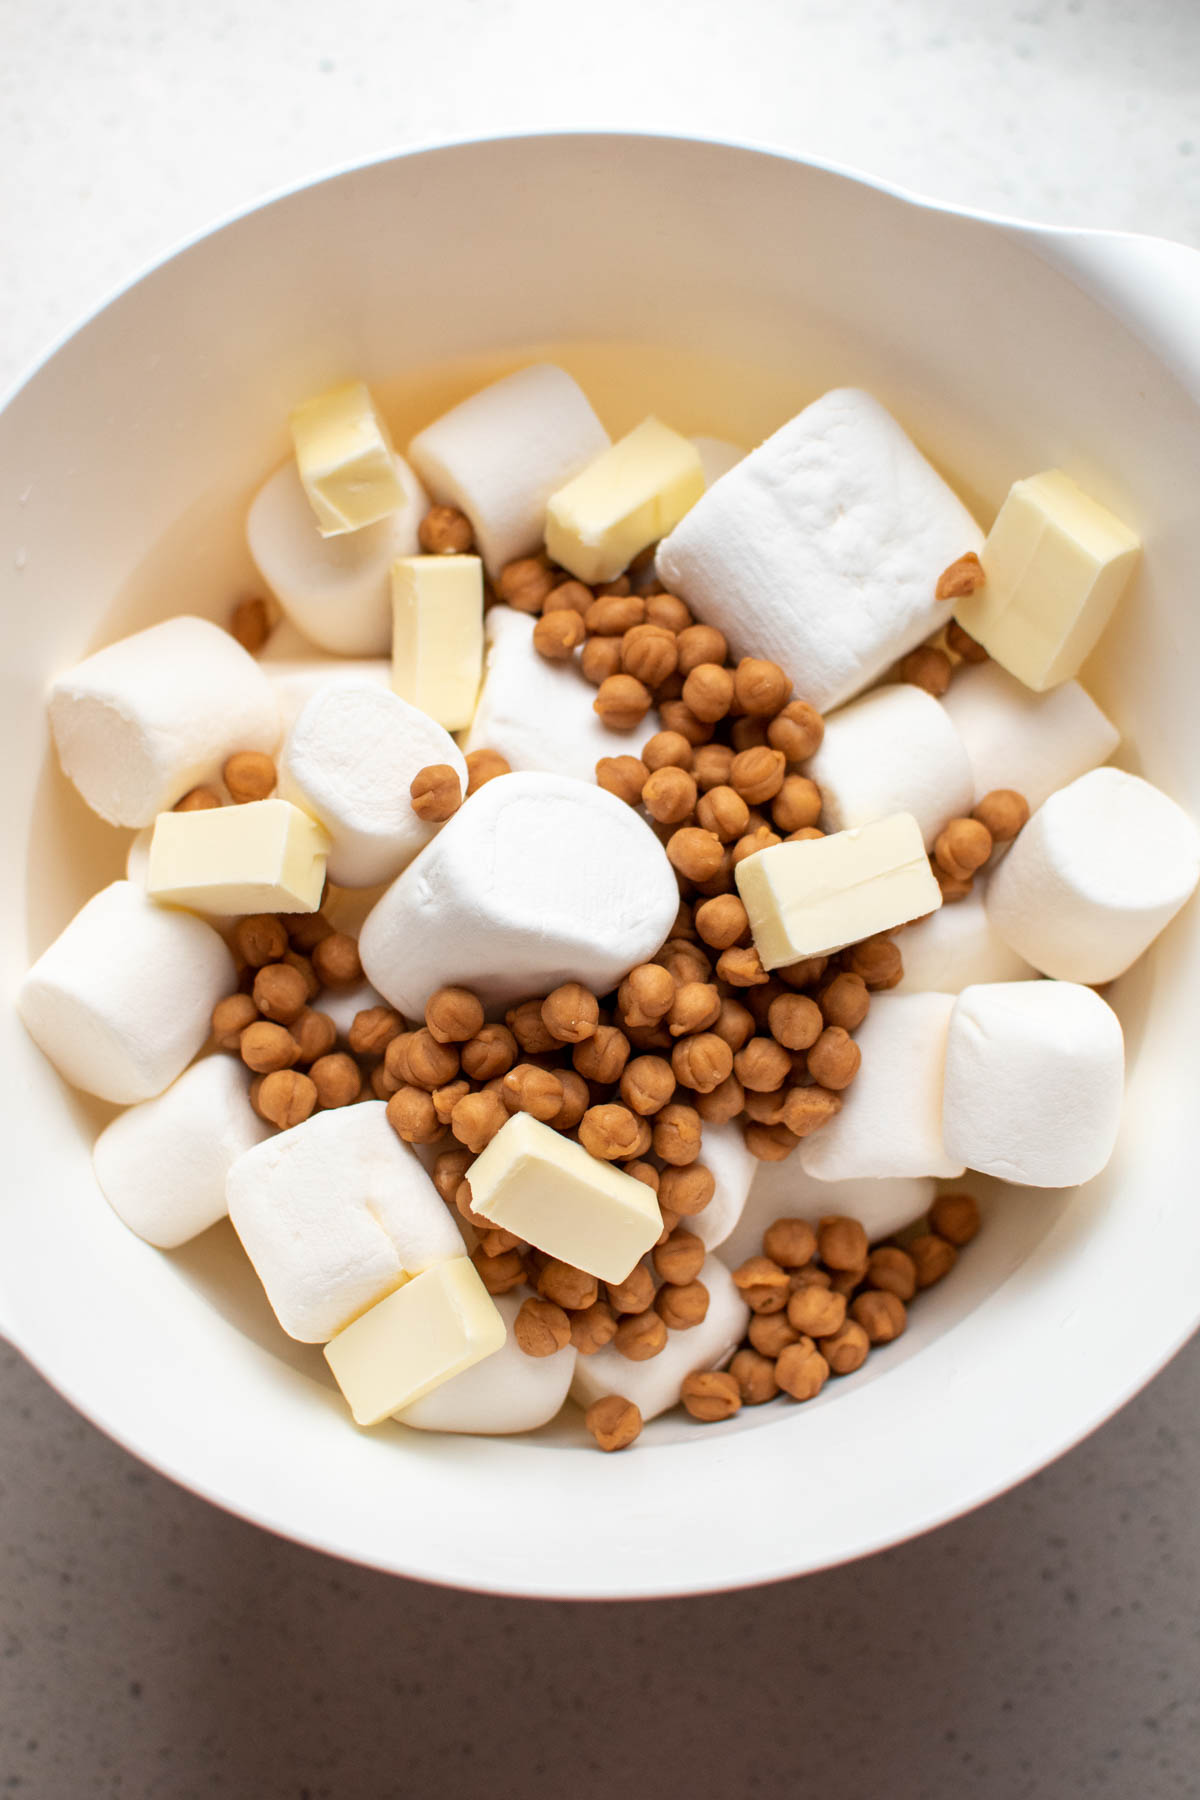 Marshmallows, caramel bits, and cubed butter in large white mixing bowl.